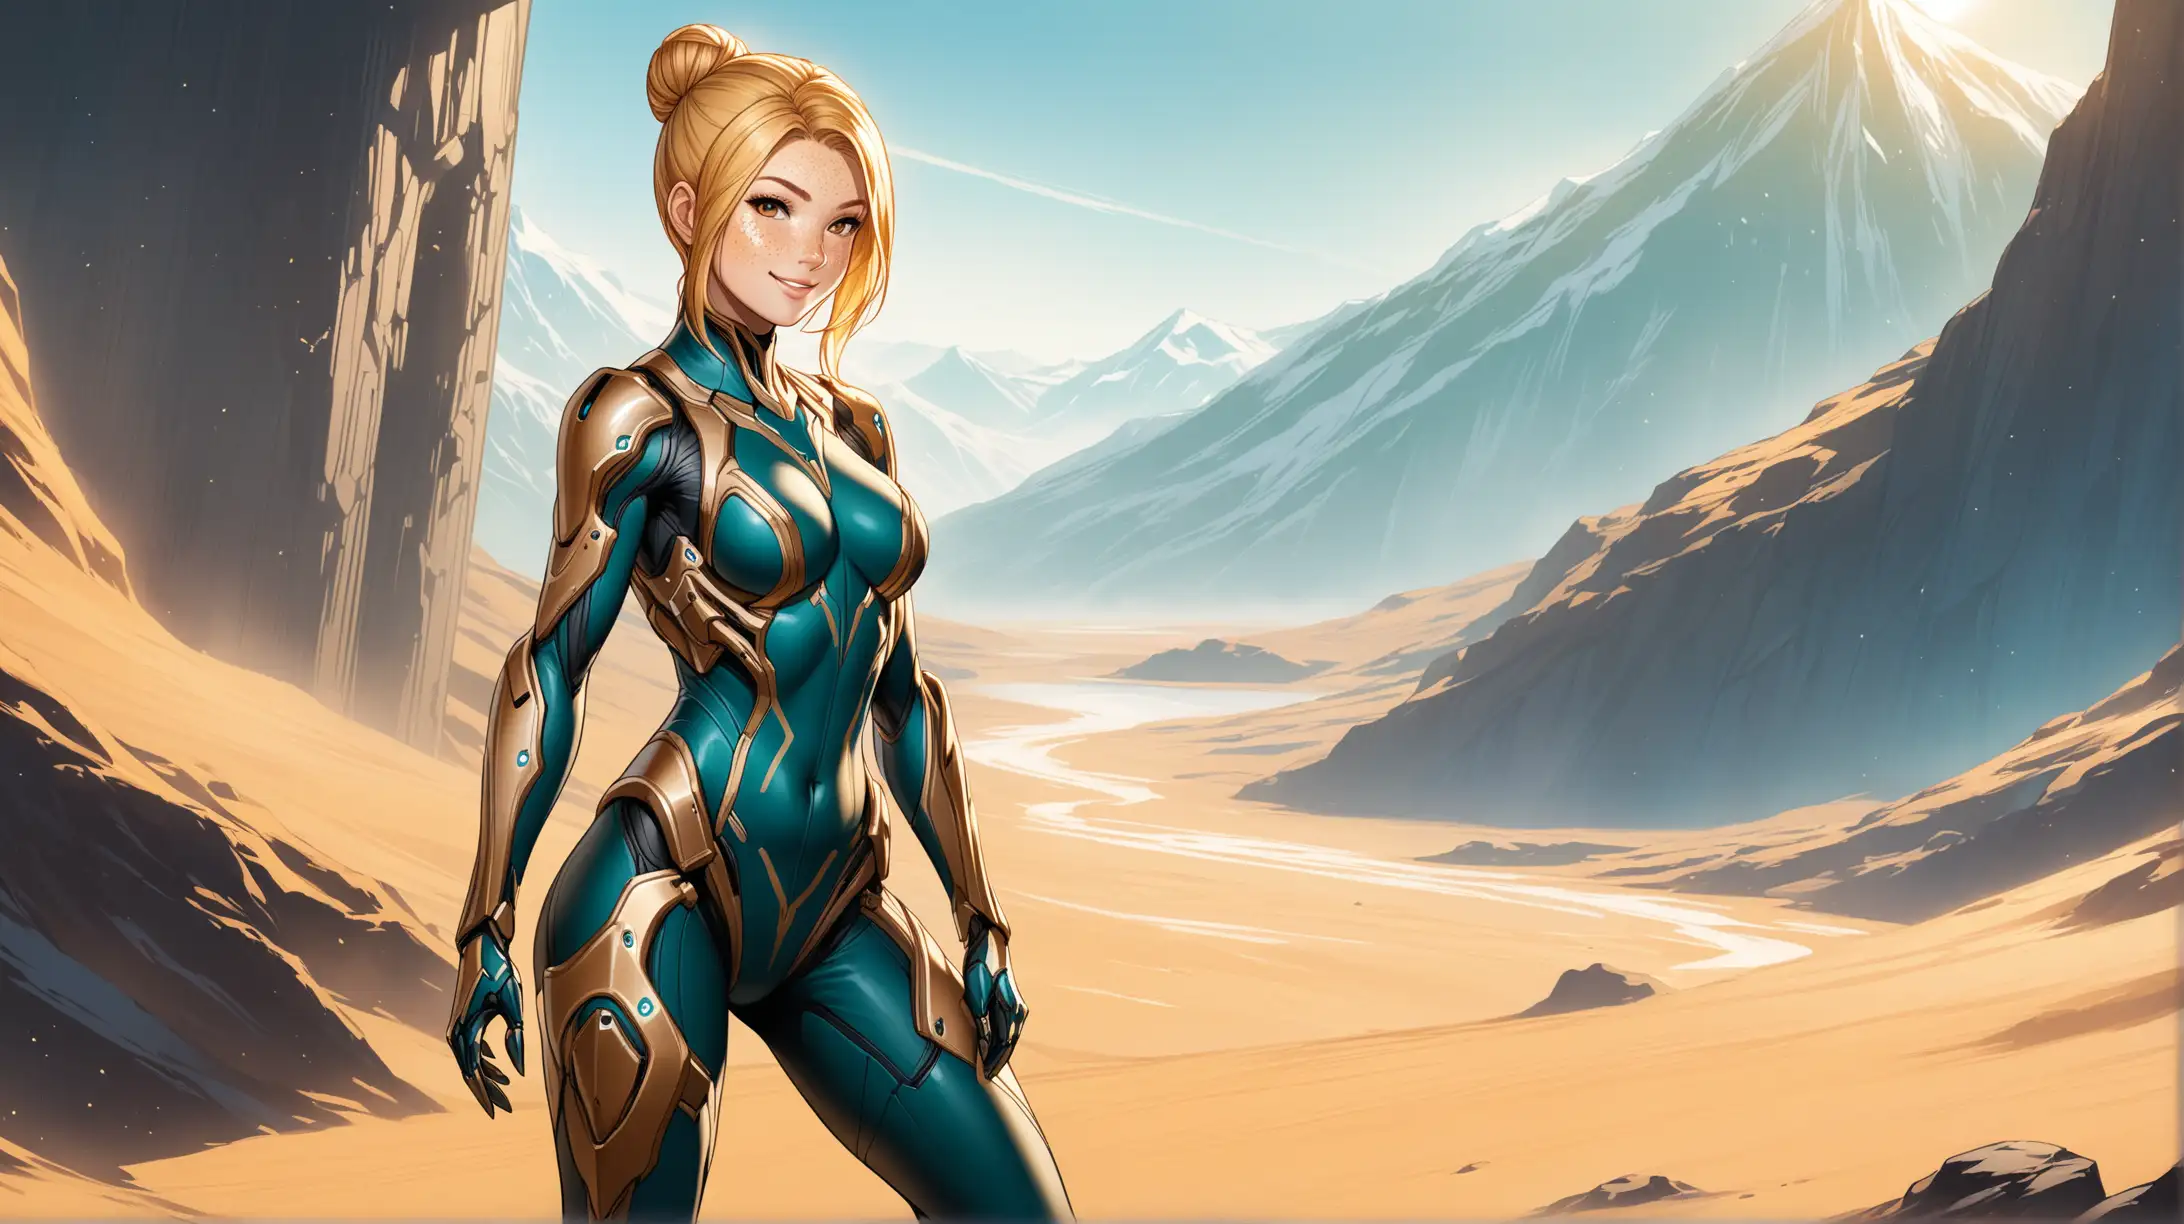 Confident Blonde Woman in WarframeInspired Bodysuit Poses Outdoors